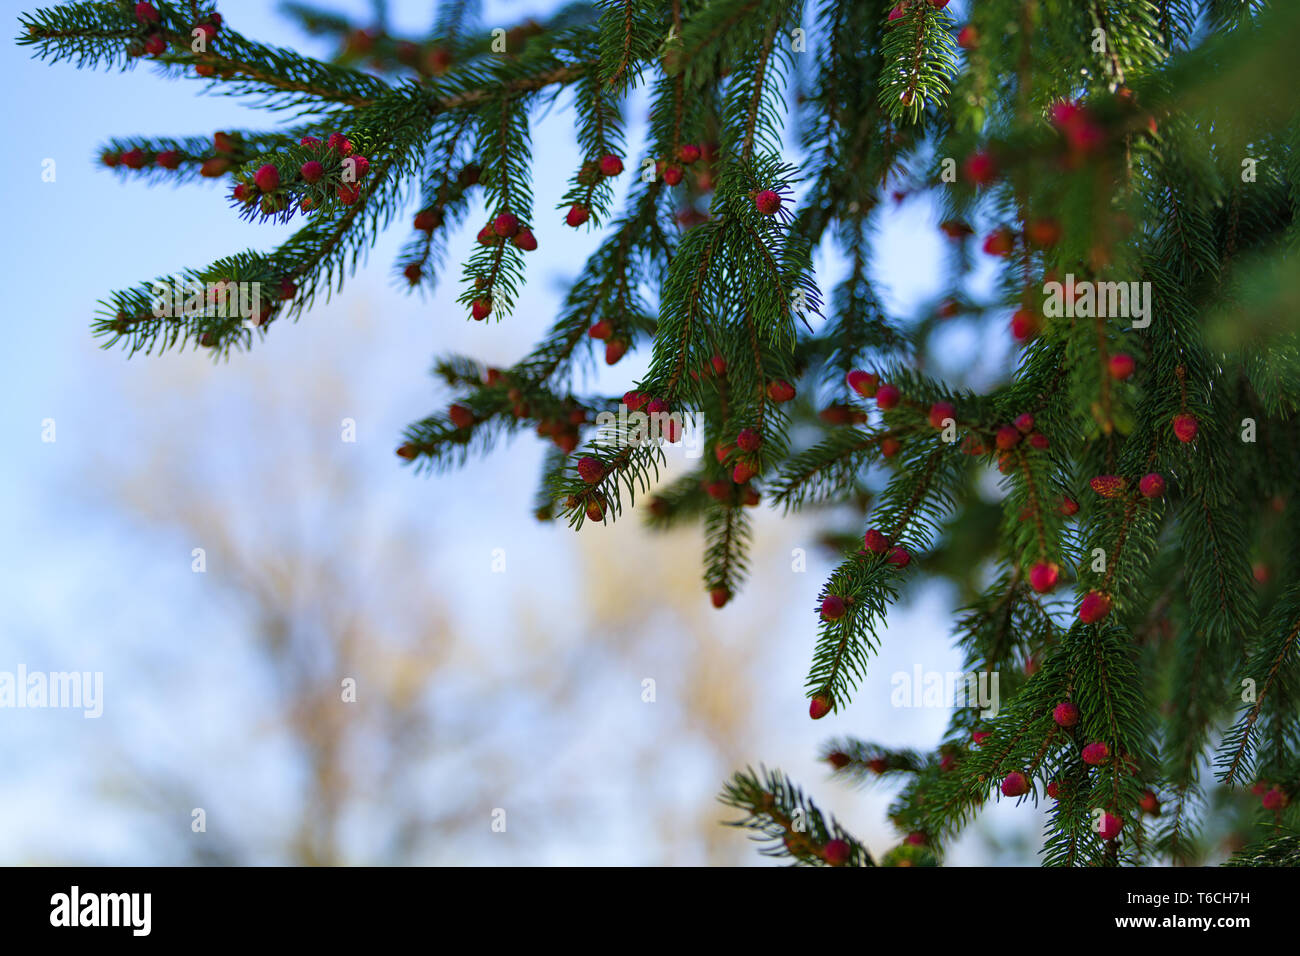 Spring berries on a cedar tree at the Overland Park Arboretum. Stock Photo